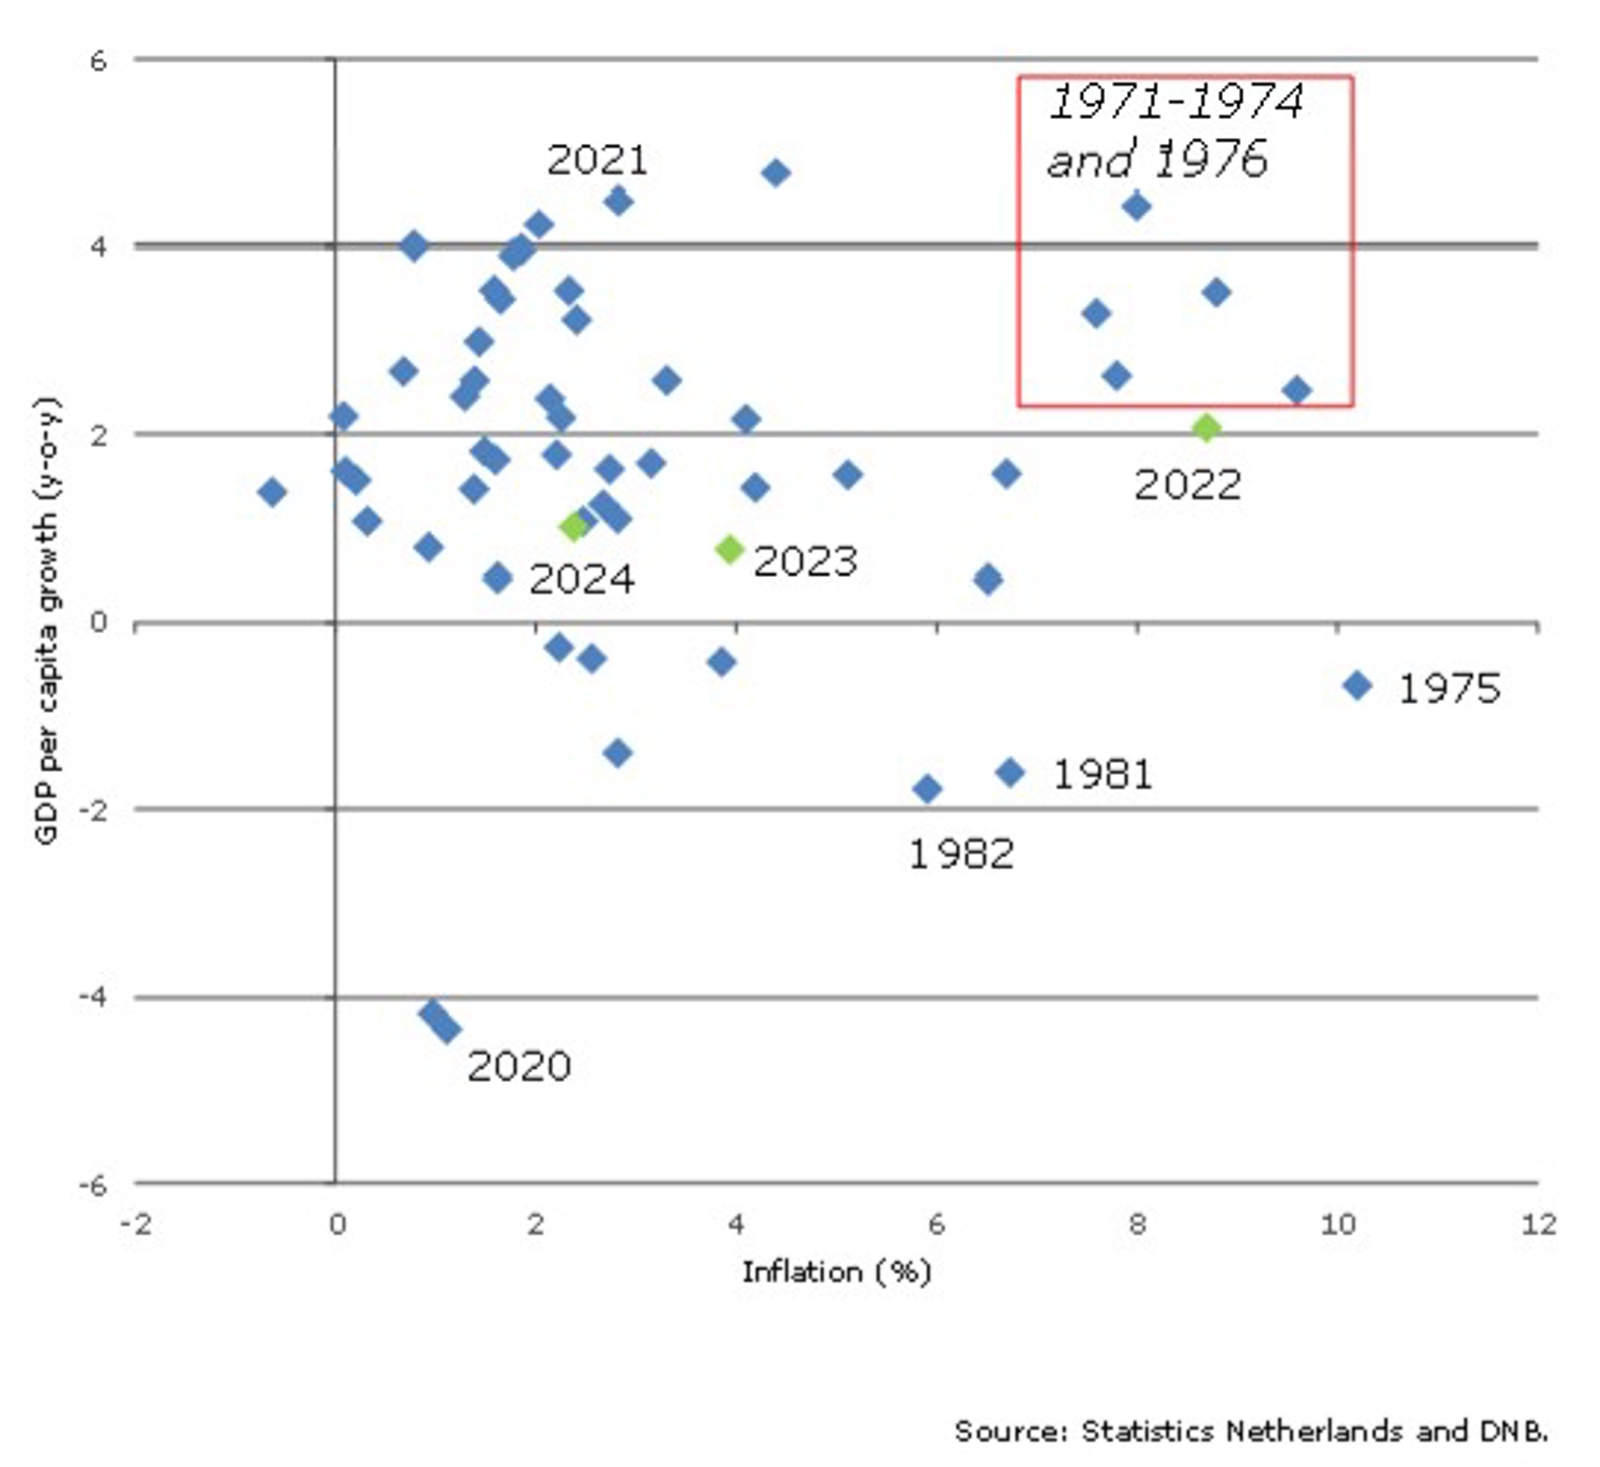 Stagflation, high inflation in the 1970s compared to the year 2022